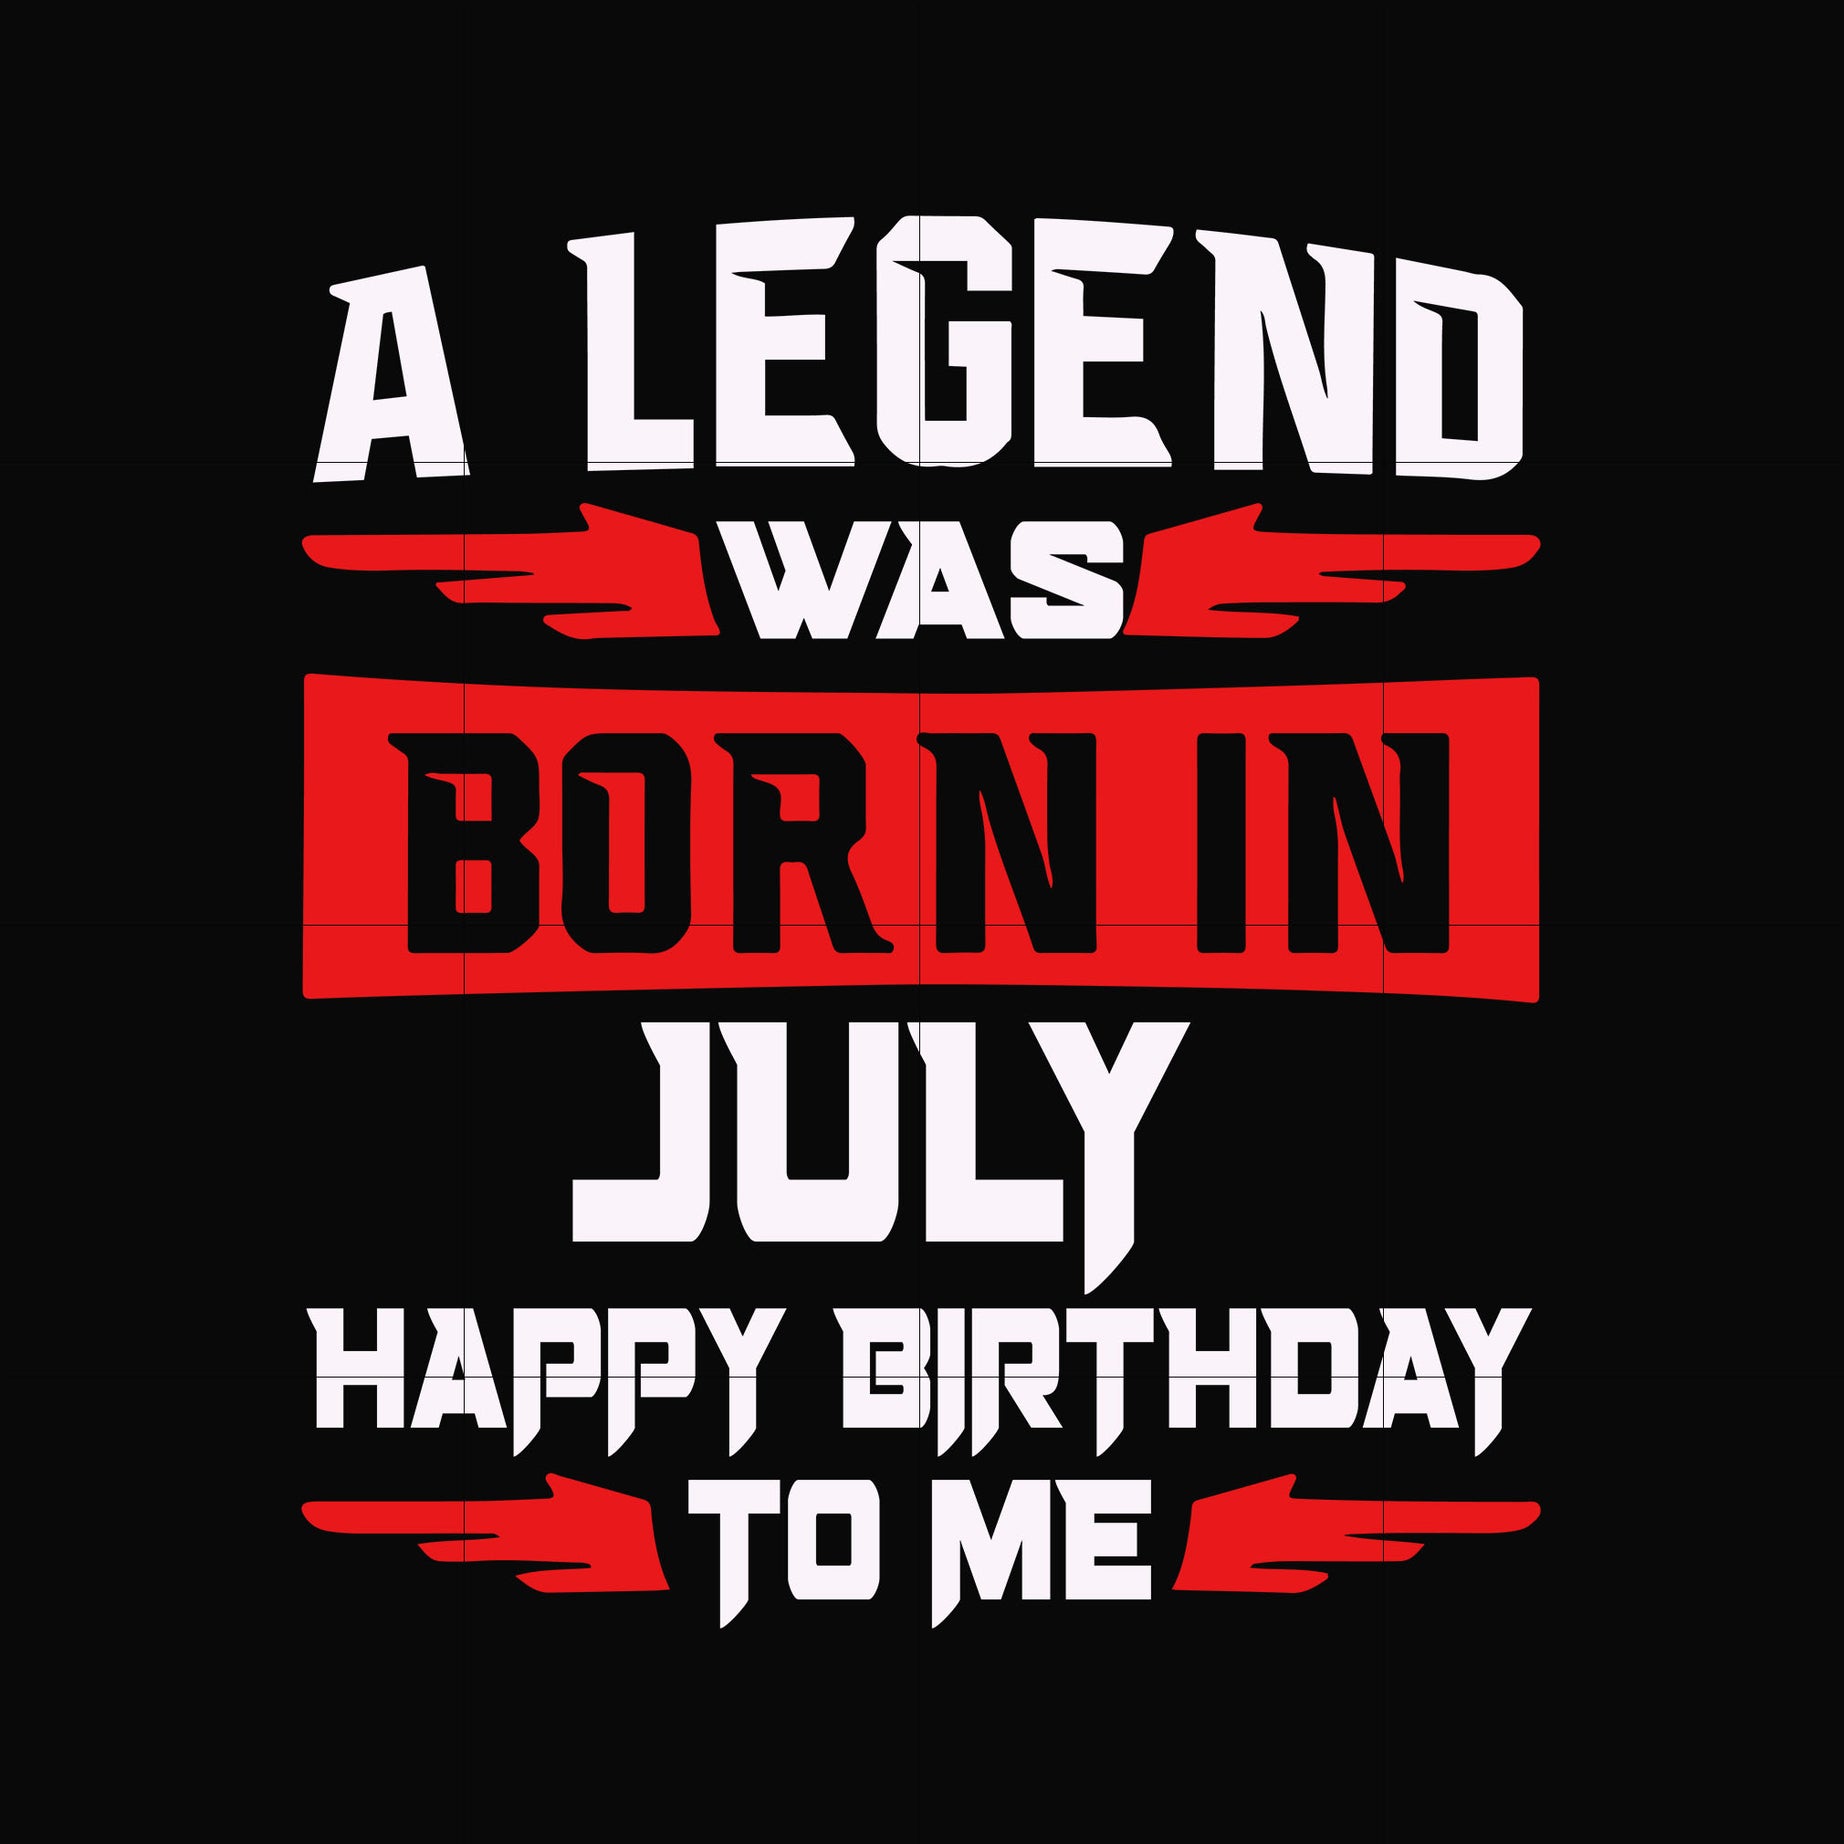 A legend was born in July happy birthday to me svg, png, dxf, eps digital file BD0116